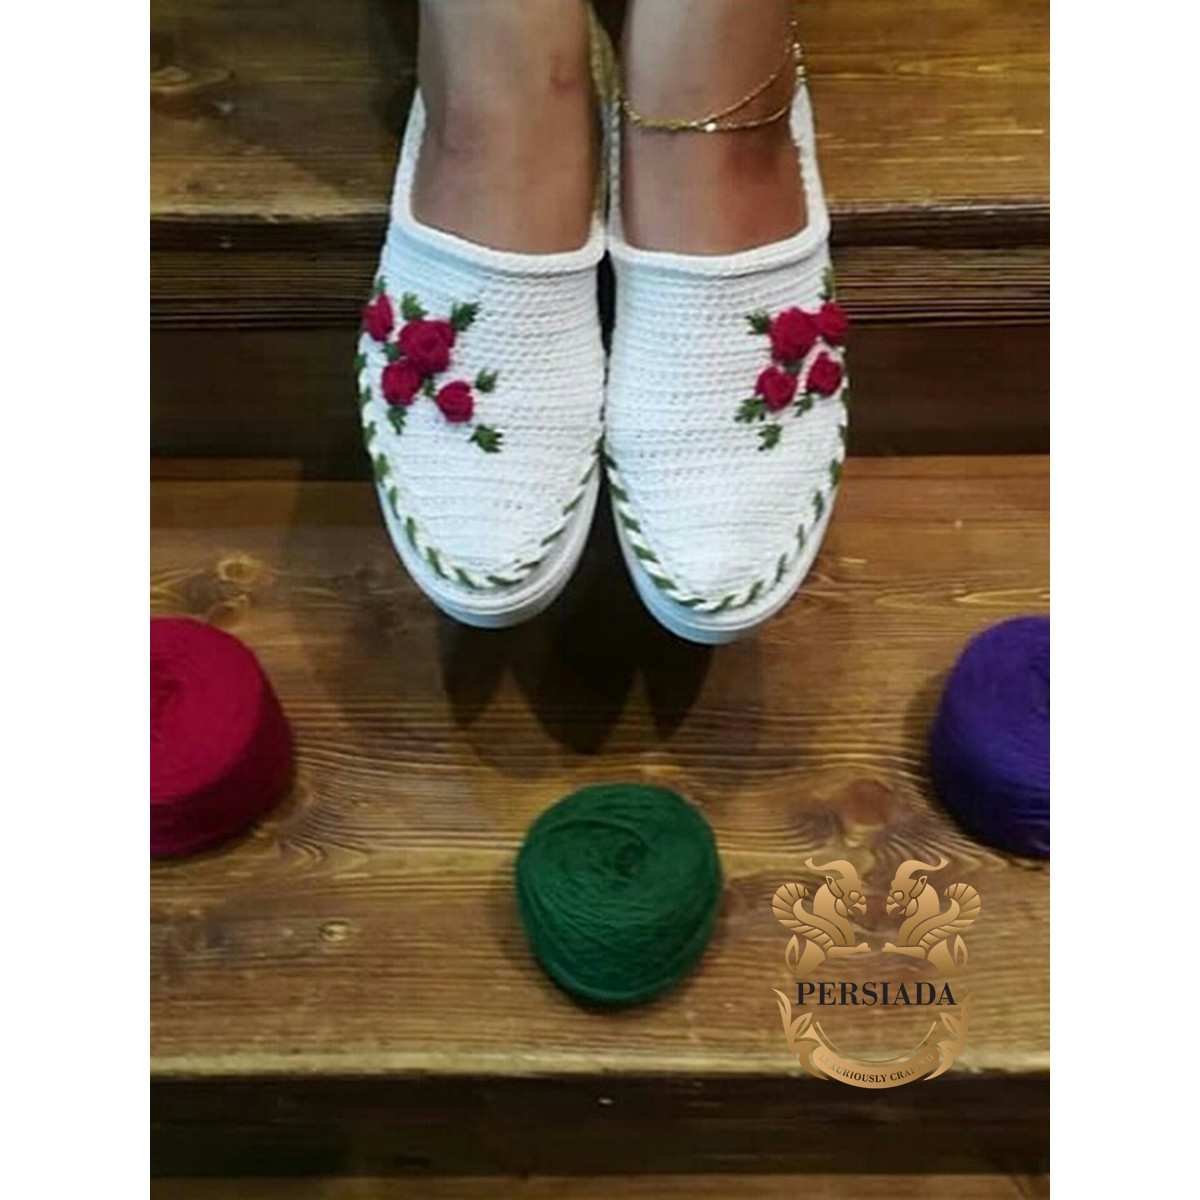 Give Traditional Persian Shoes | Cotton Handmade | PHG701-Persian Handicrafts